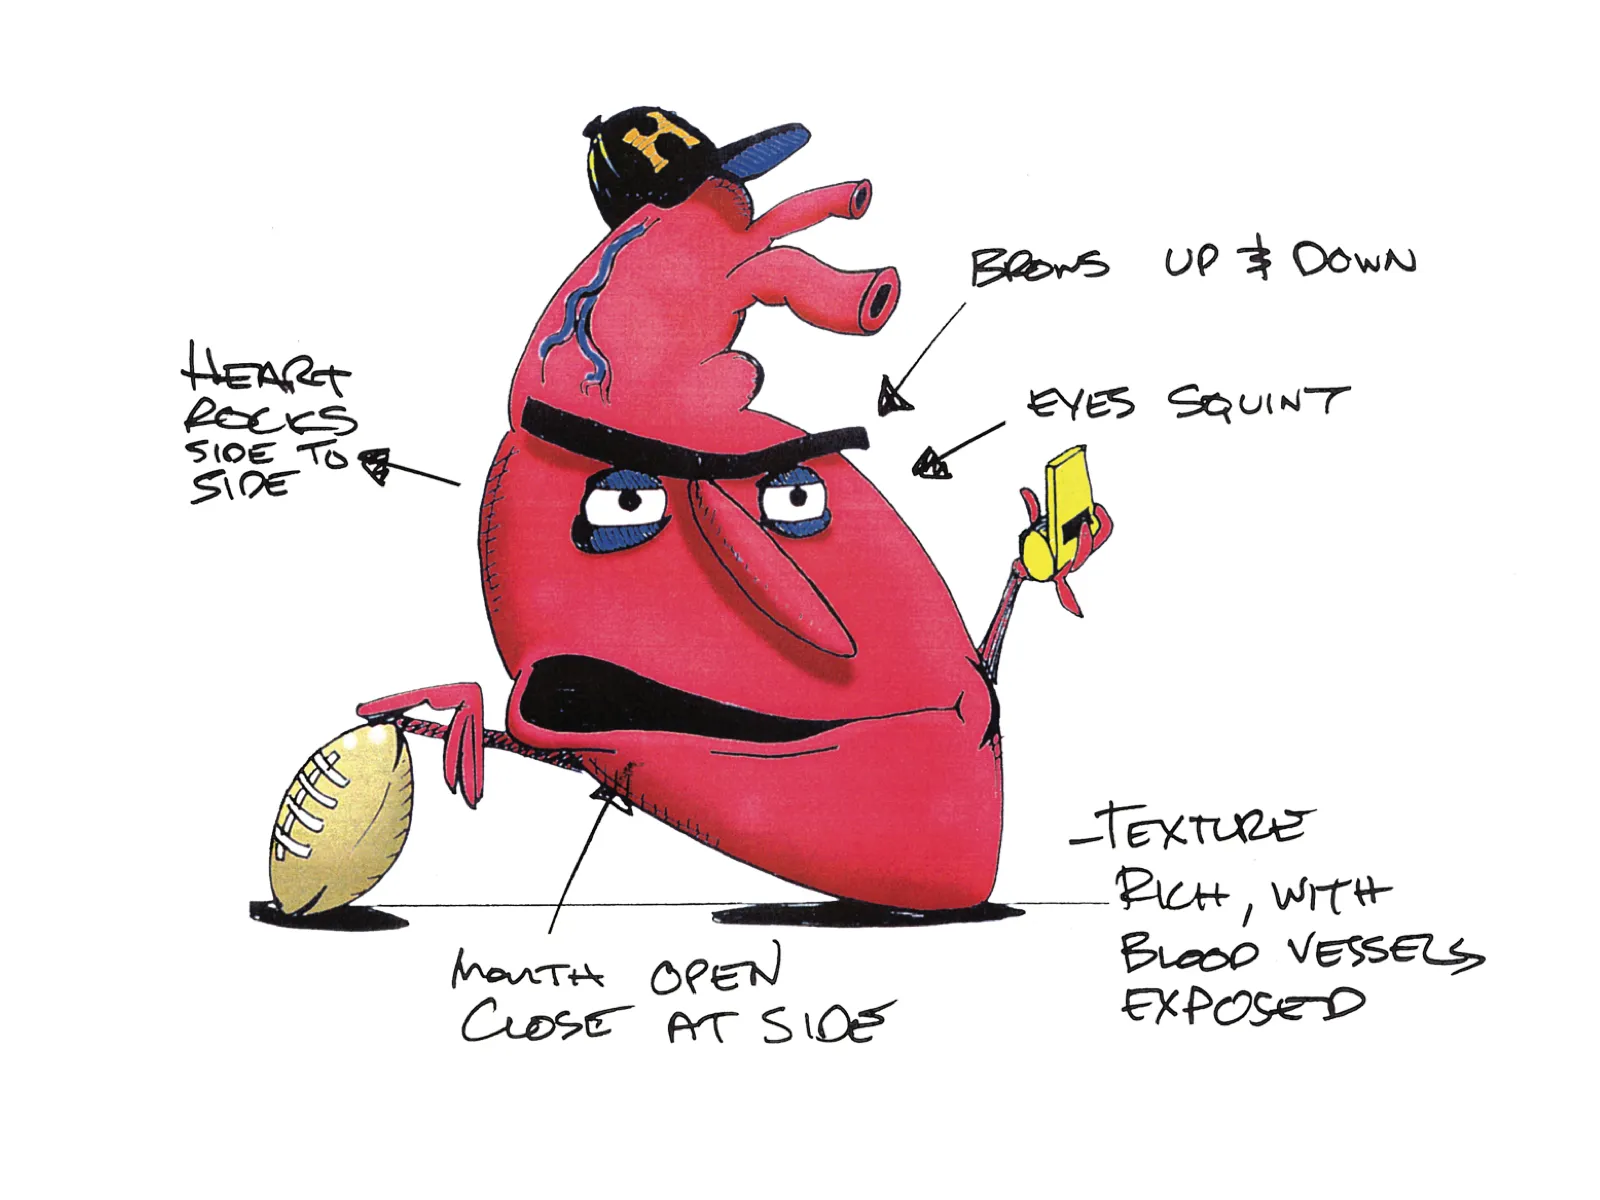 Planning drawing of Health Royale heart: Heart rocks side to side. Brows up and down. Eyes squint. Mouth open, closed at side. Text rich with blood vessels exposed.